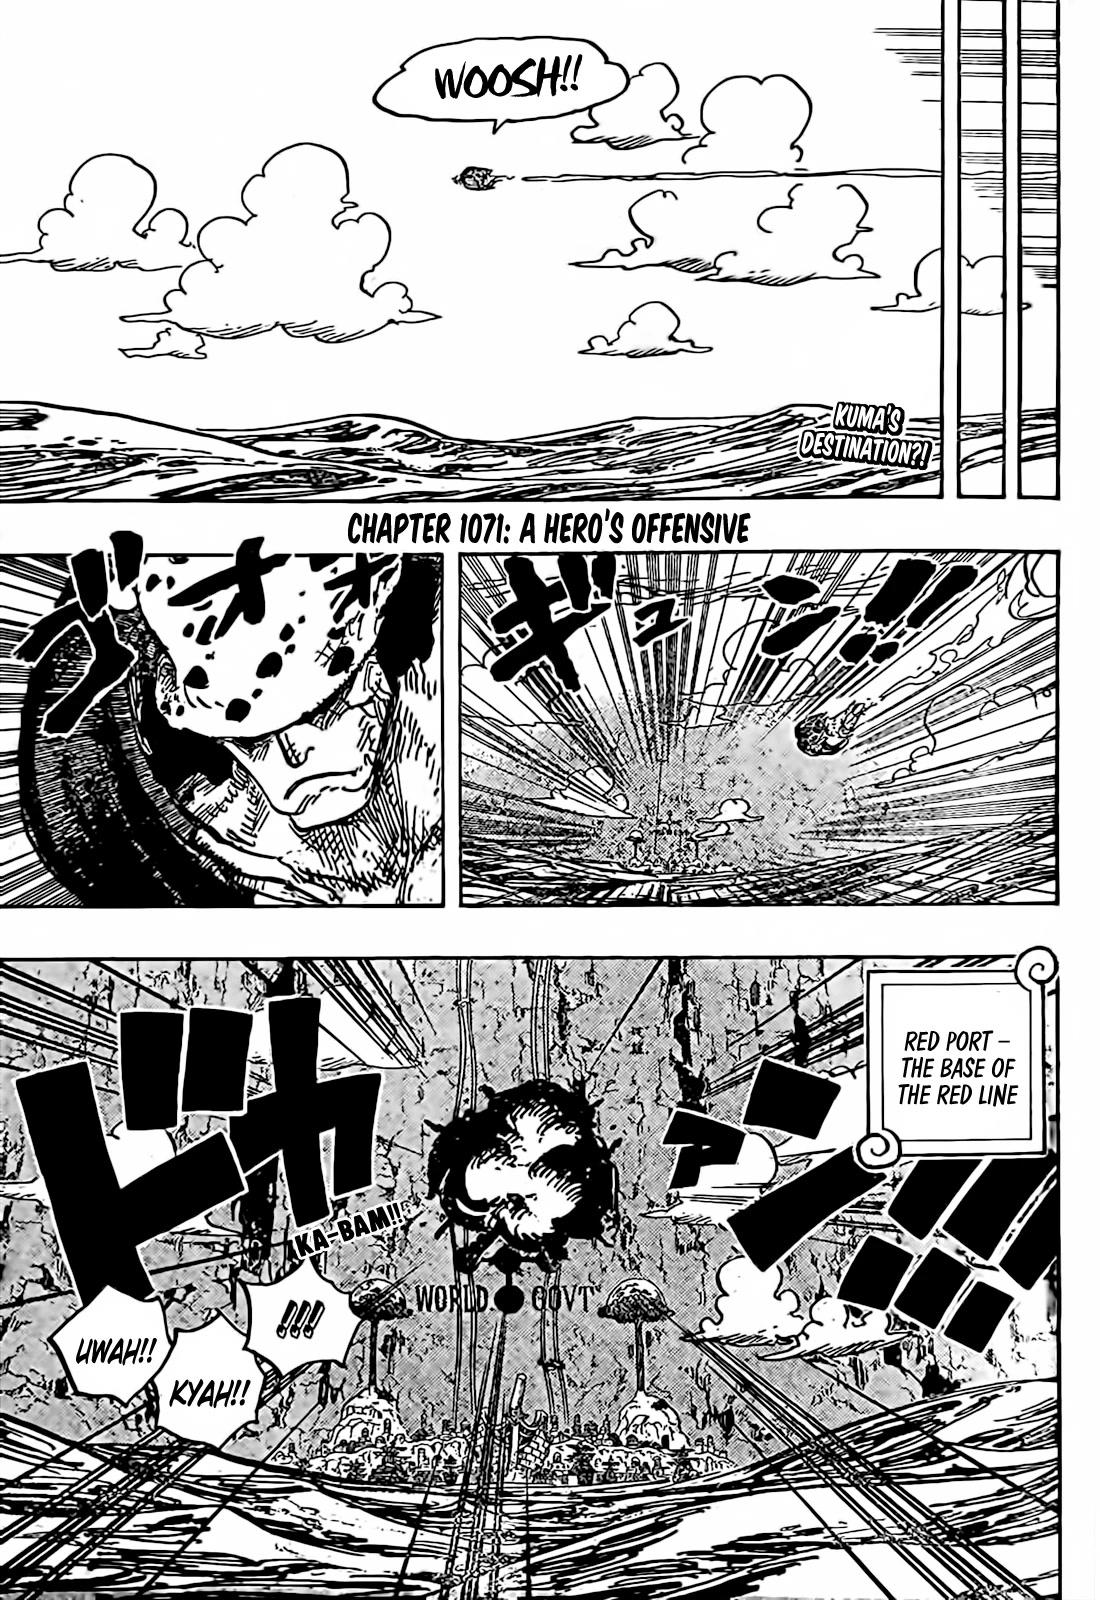 One Piece Chapter 1065 Spoilers Delayed As Break Approches